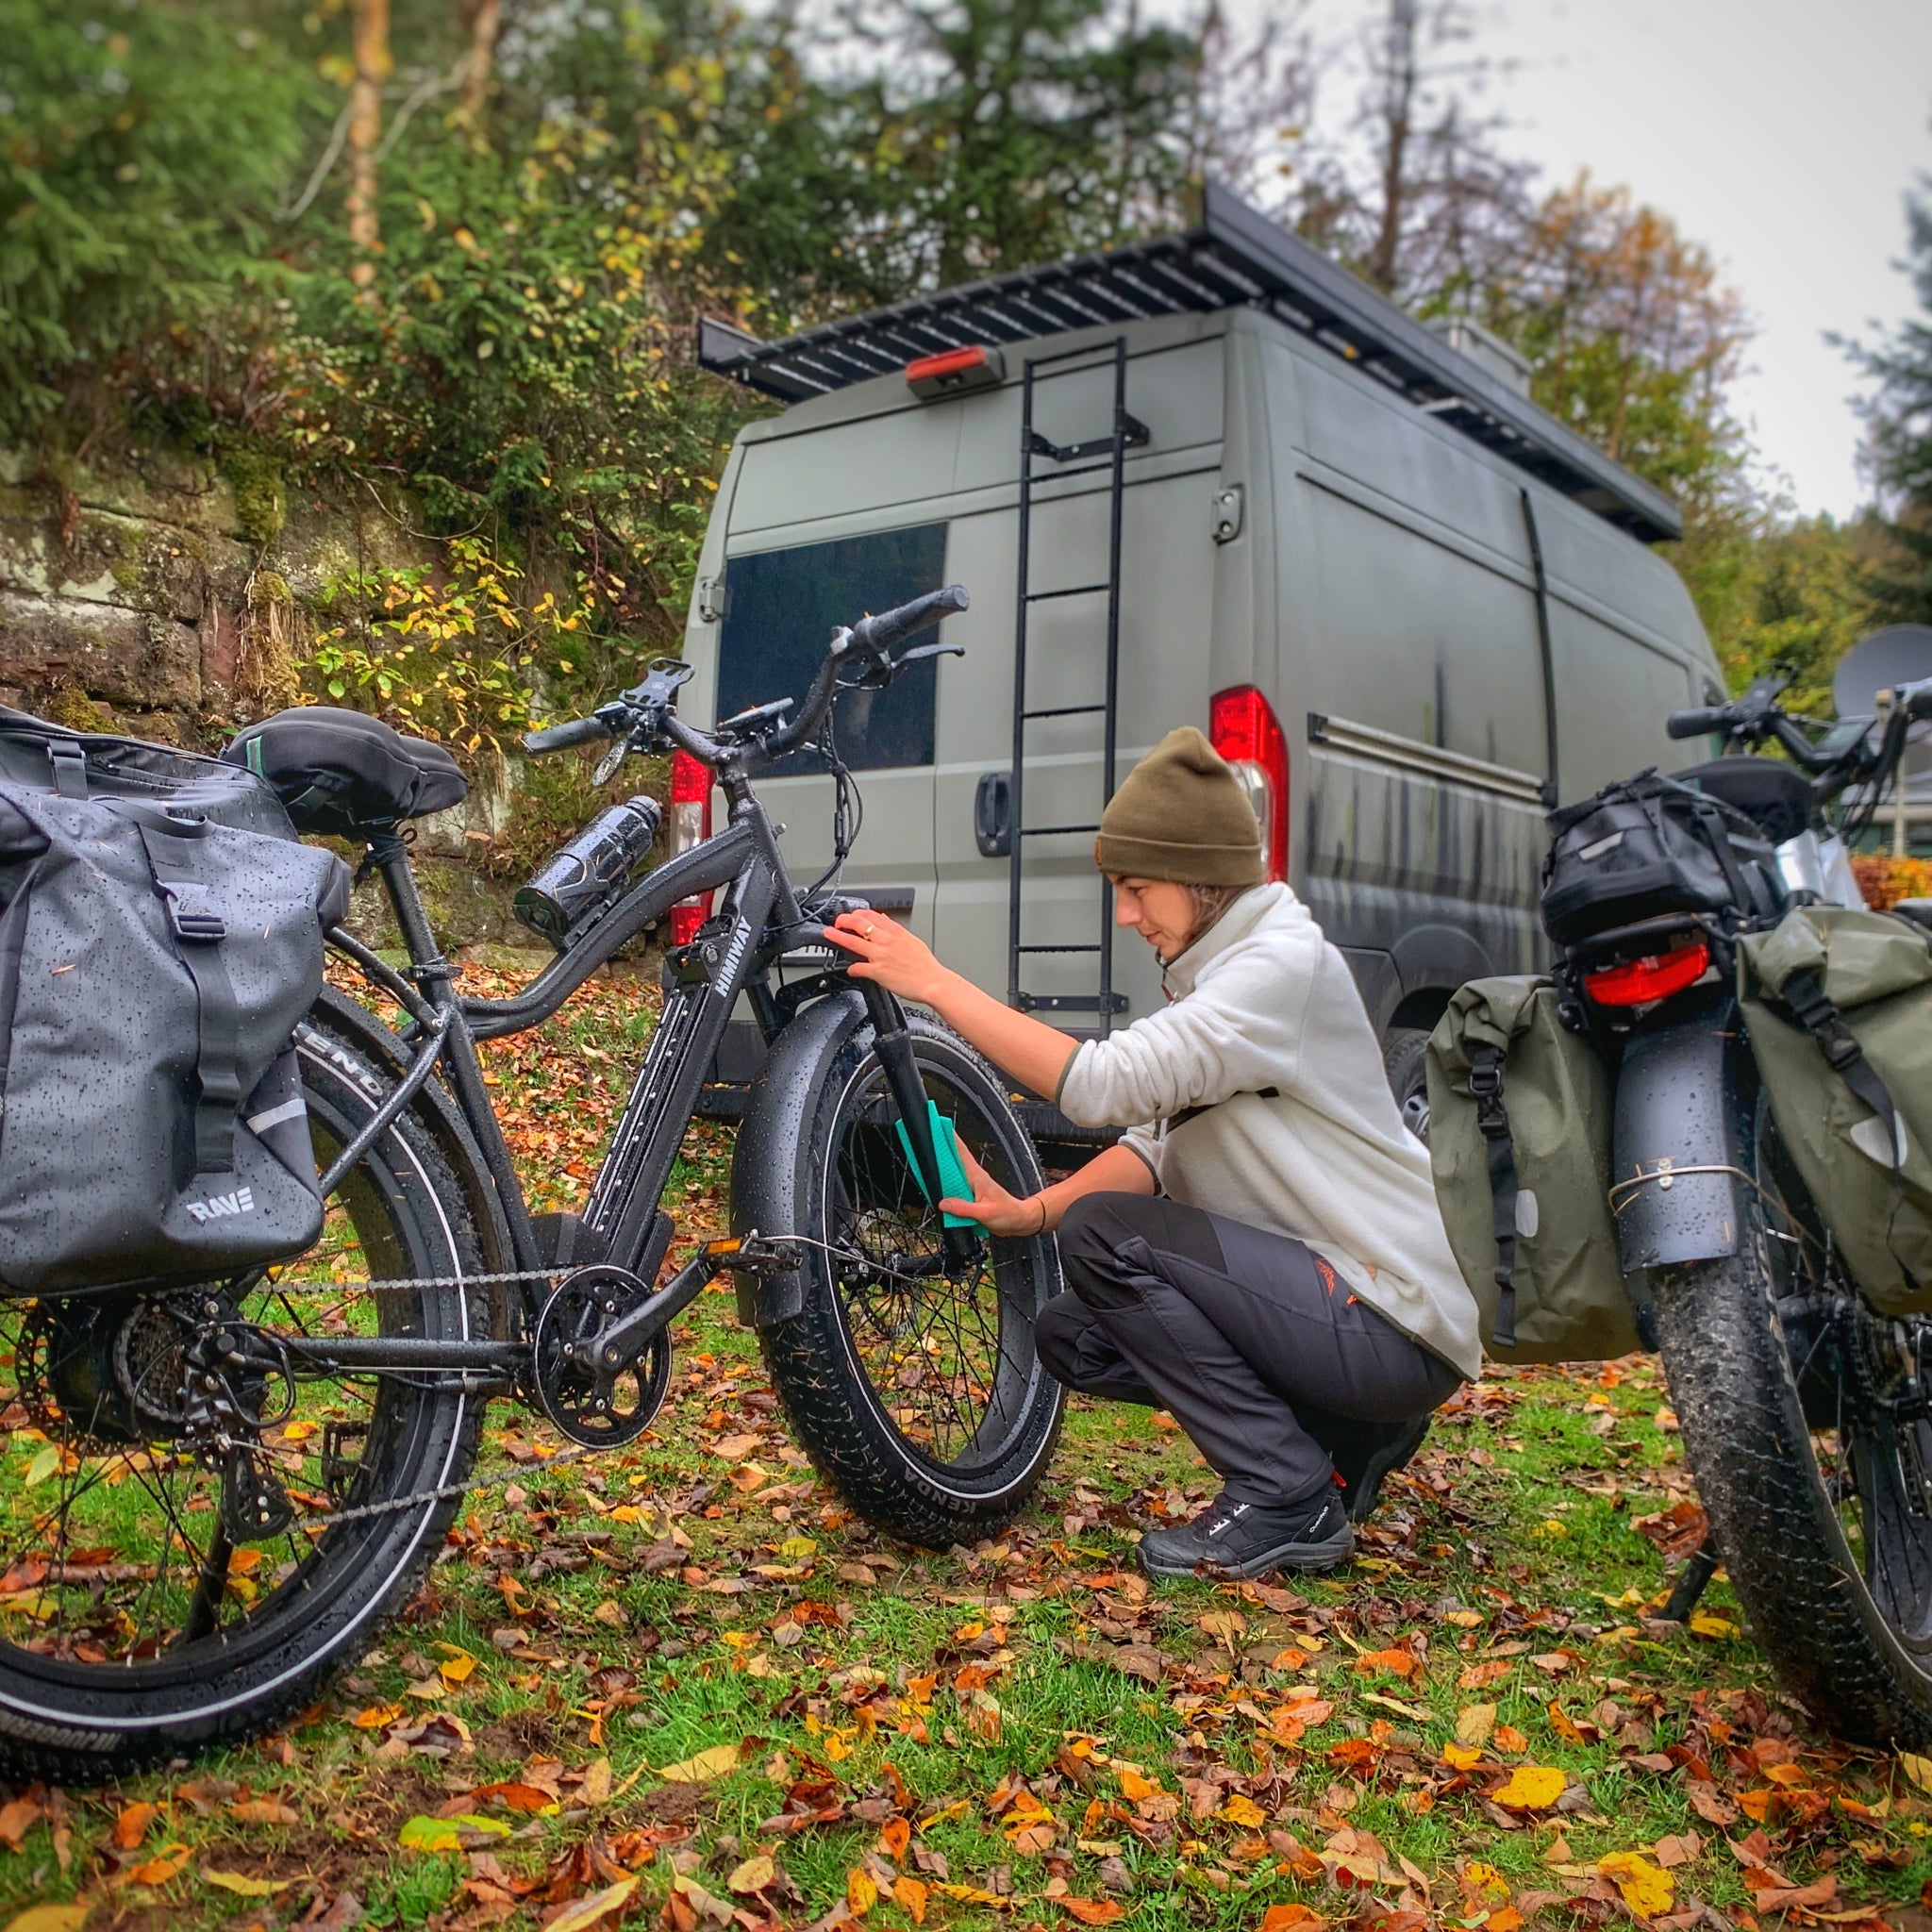 How To Easily Regulate The Tire Pressure on Your Fat Tire Bike